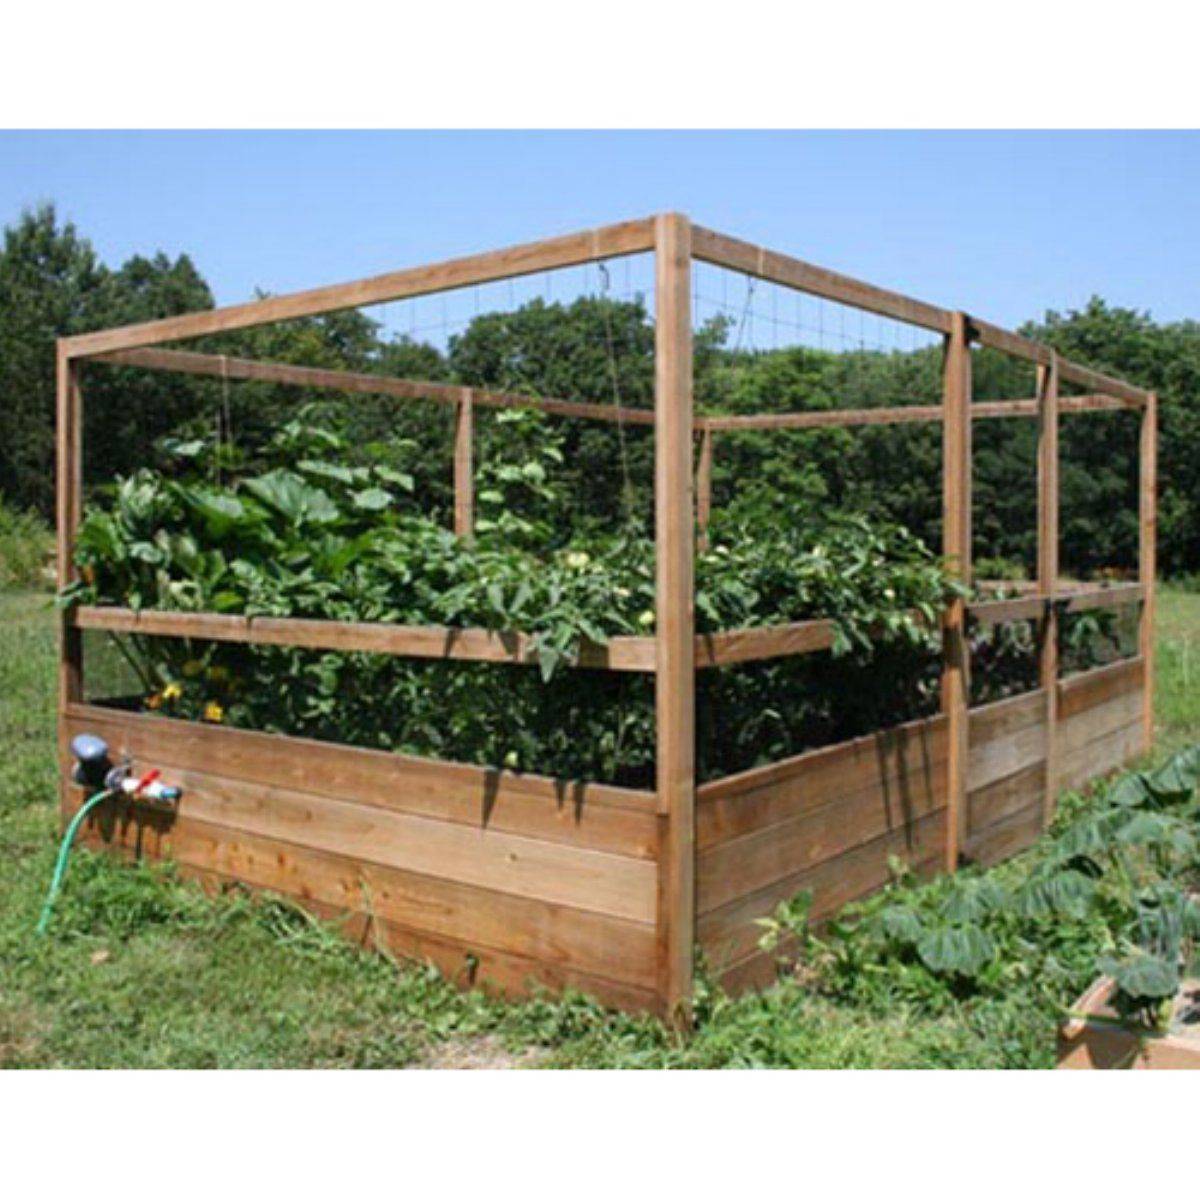 Top Raised Garden Bed Ideas Pictures